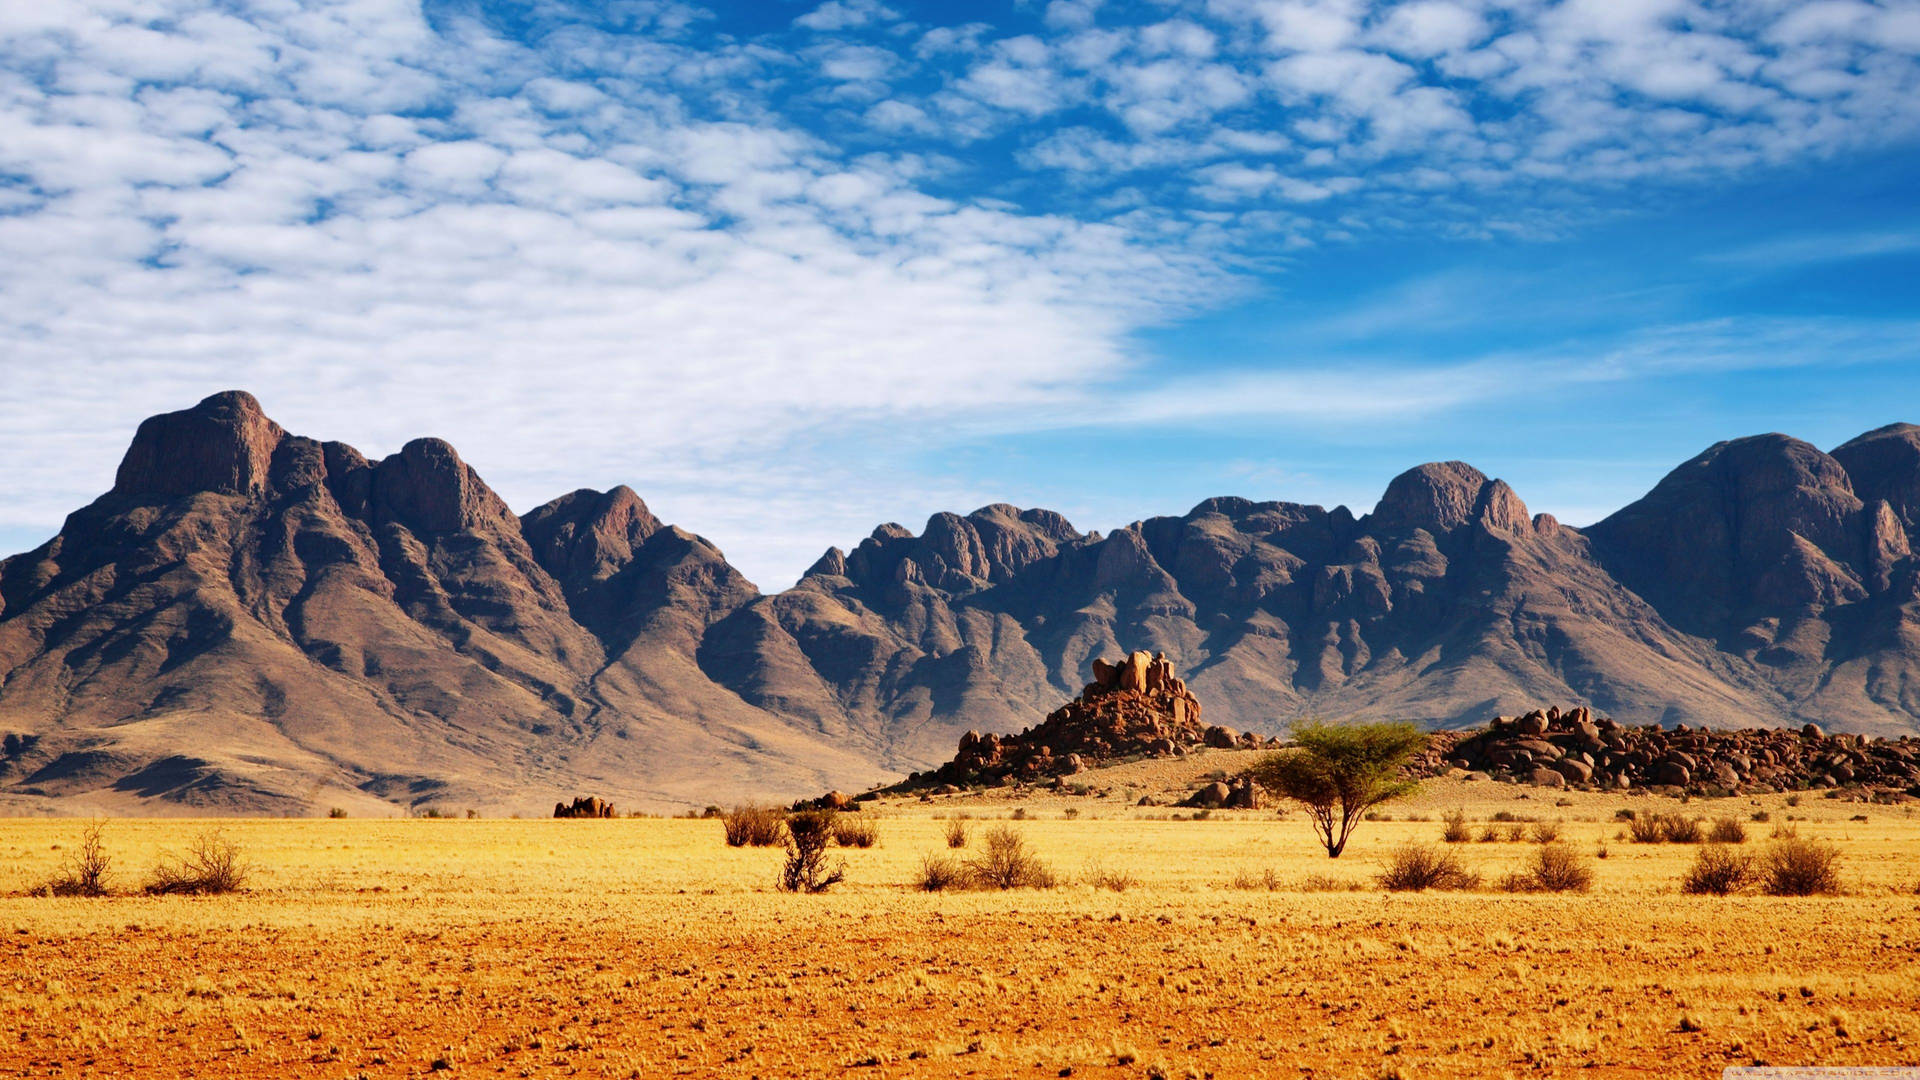 Breathtaking View of the Desert Surrounded by High Mountains Wallpaper